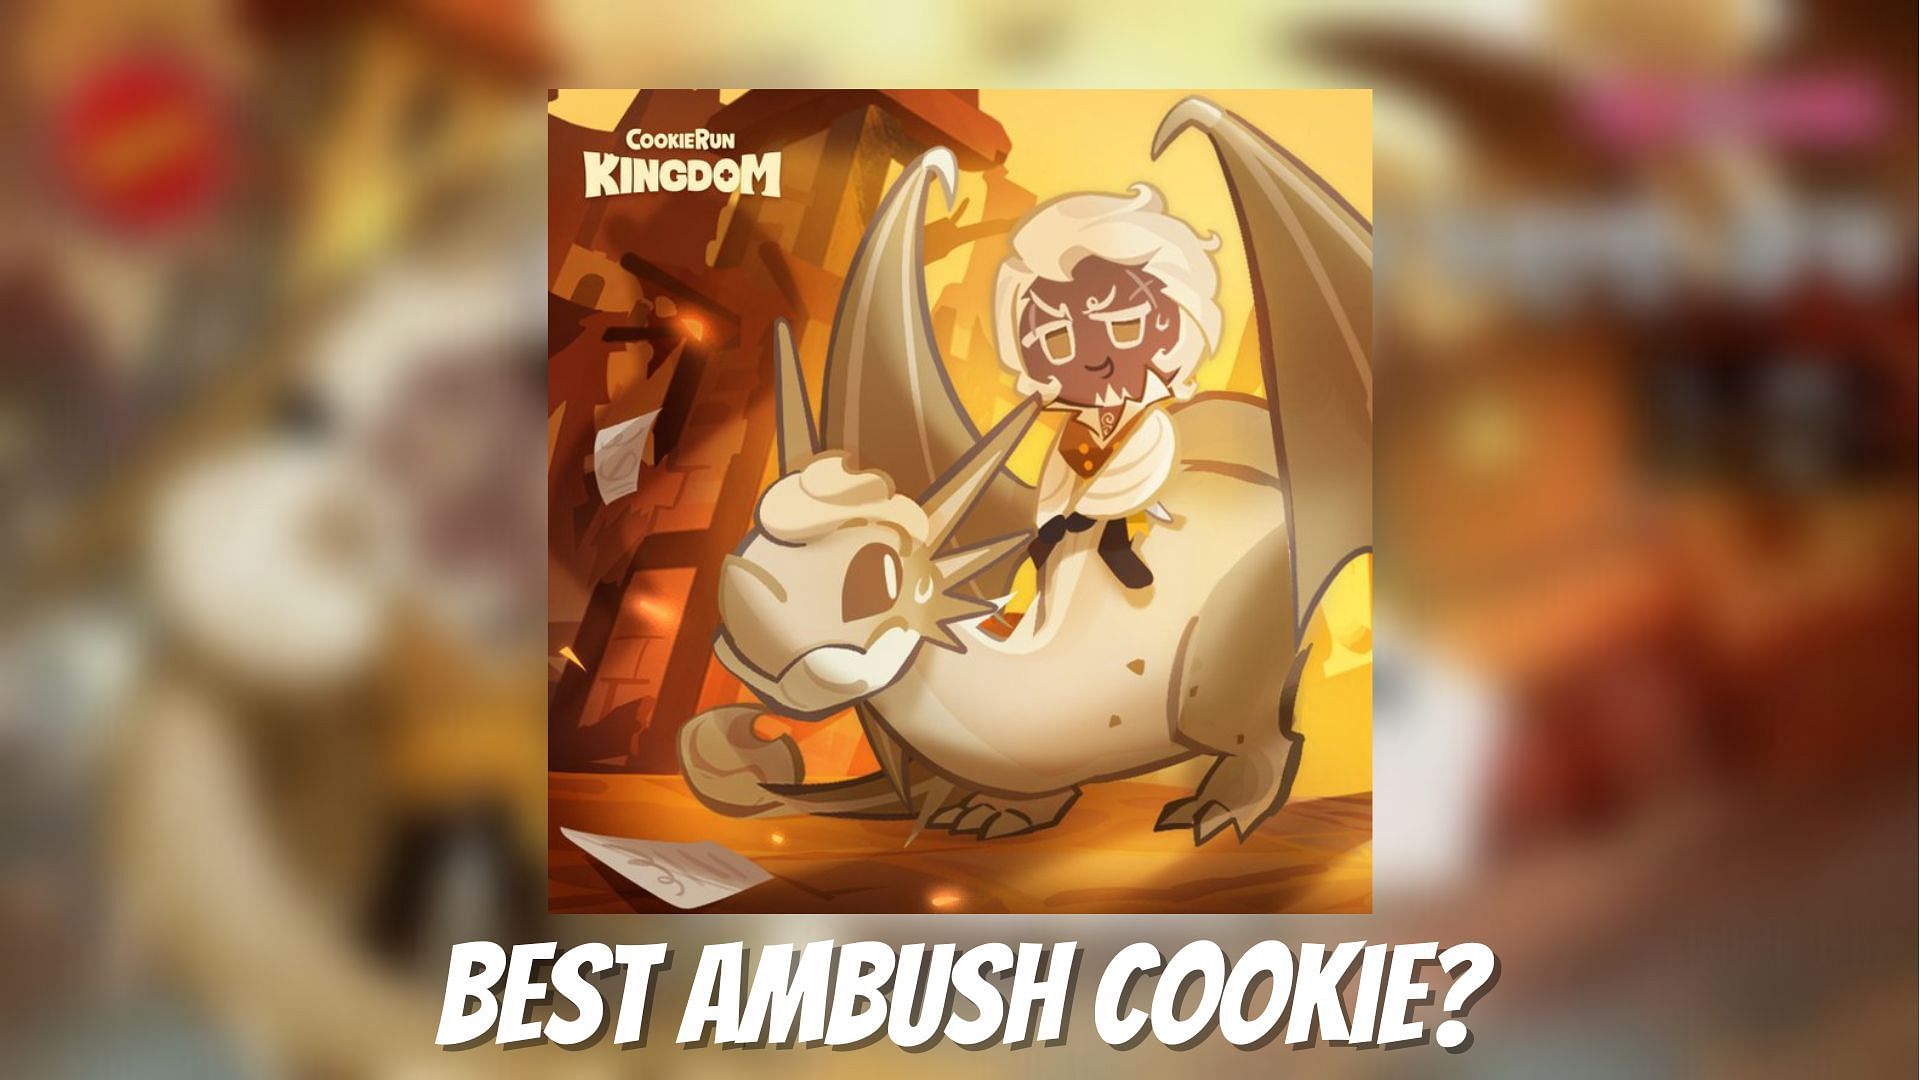 Ambush Cookies are one of the most pre-eminent DPS classes in CRK (Image via Sportskeeda)